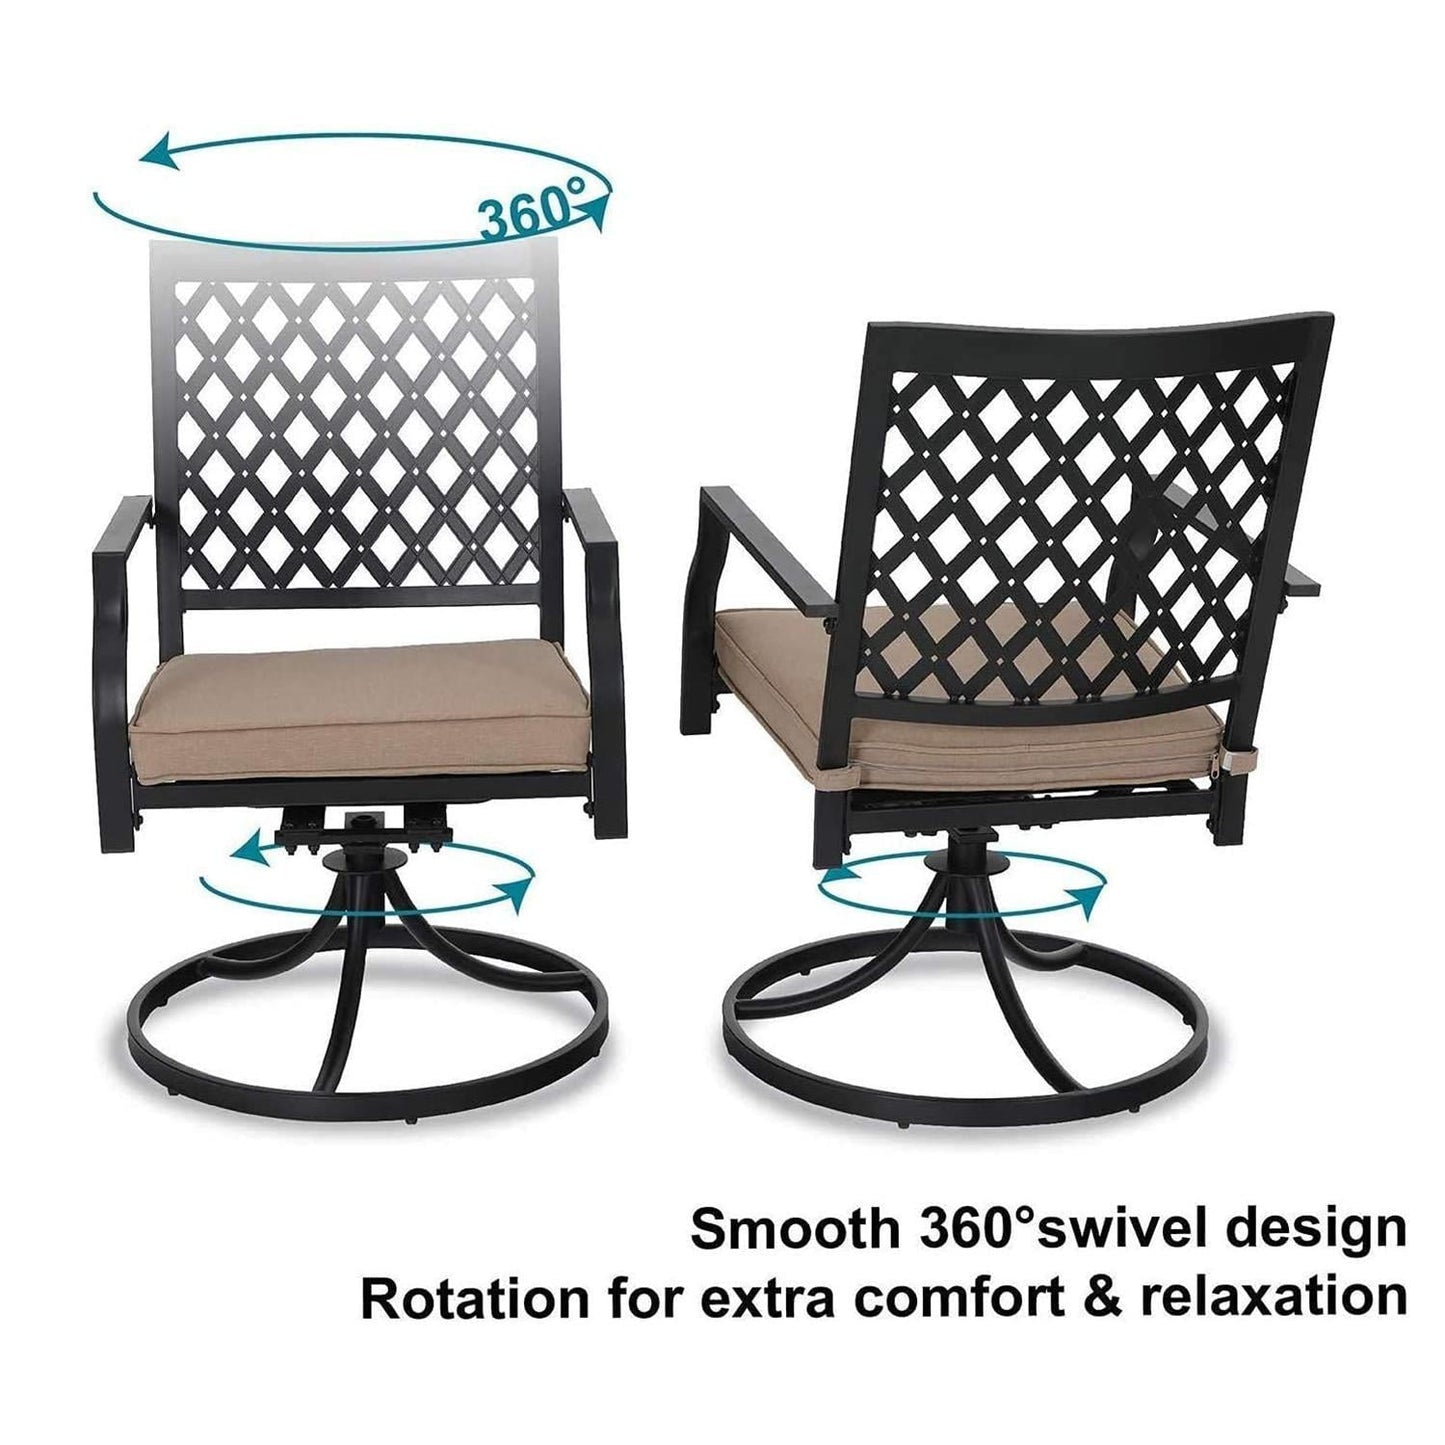 Sophia & William 7 Peices Outdoor Patio Dining Set Swivel Chairs and Wooden-like Table Furniture Set